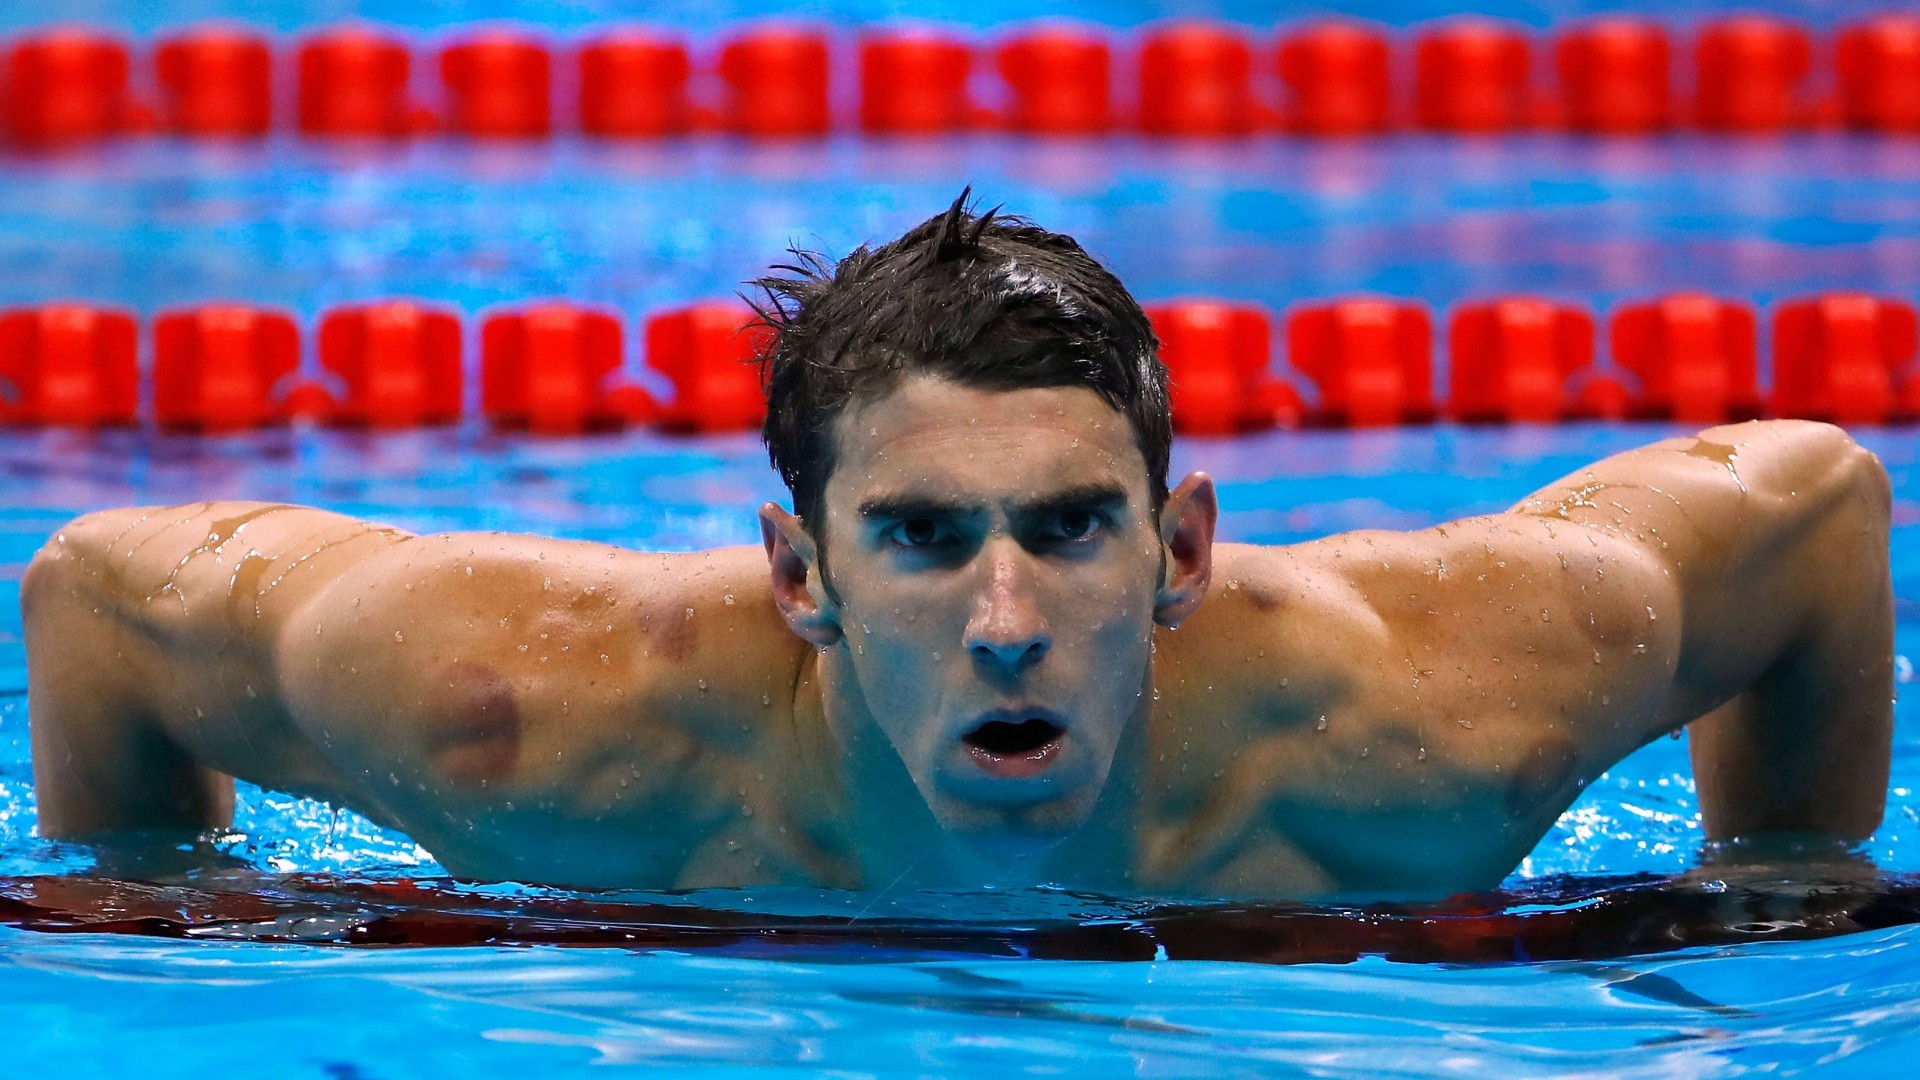 1920x1080 Download Michael phelps food, Michael phelps fly wallpaper